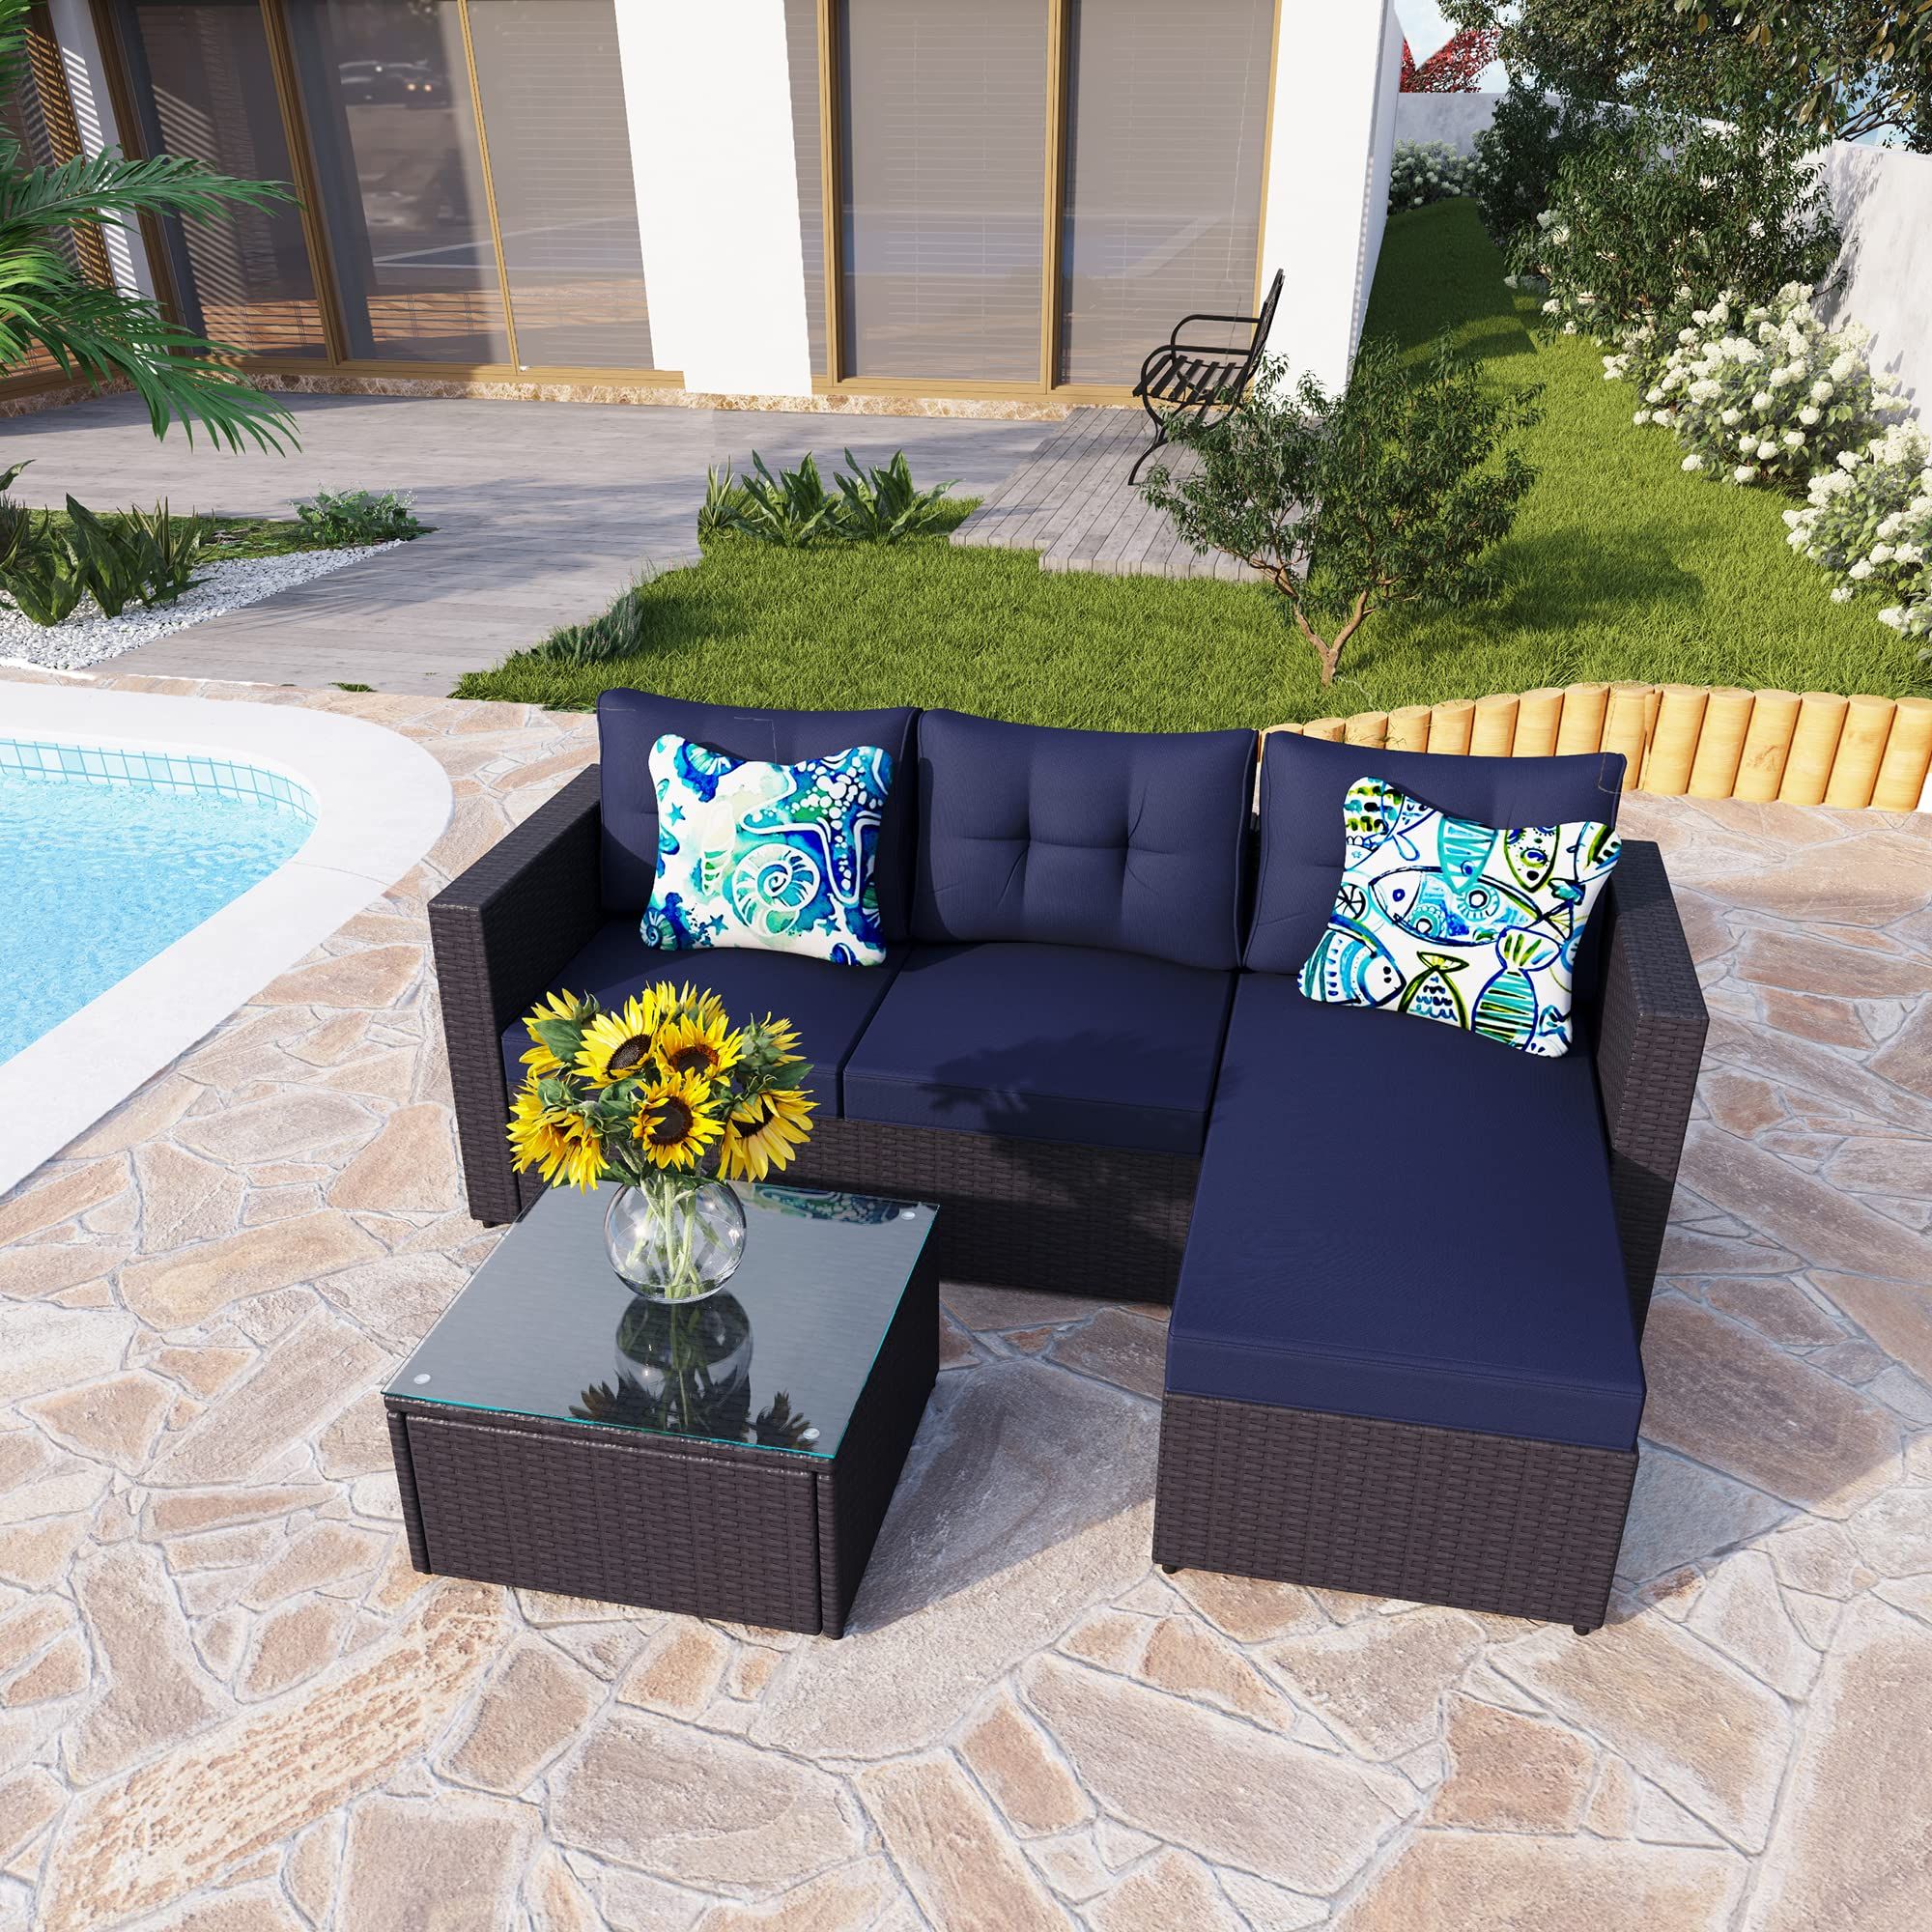 Outdoor Rattan Sectional Sofas With Coffee Table For Most Up To Date Amazon: Phi Villa 77" Wide Outdoor Rattan Sectional Sofa With Cushions  – Small Patio Wicker Furniture Set (3 – Person Seating Group, Blue) : Patio,  Lawn & Garden (Photo 4 of 15)